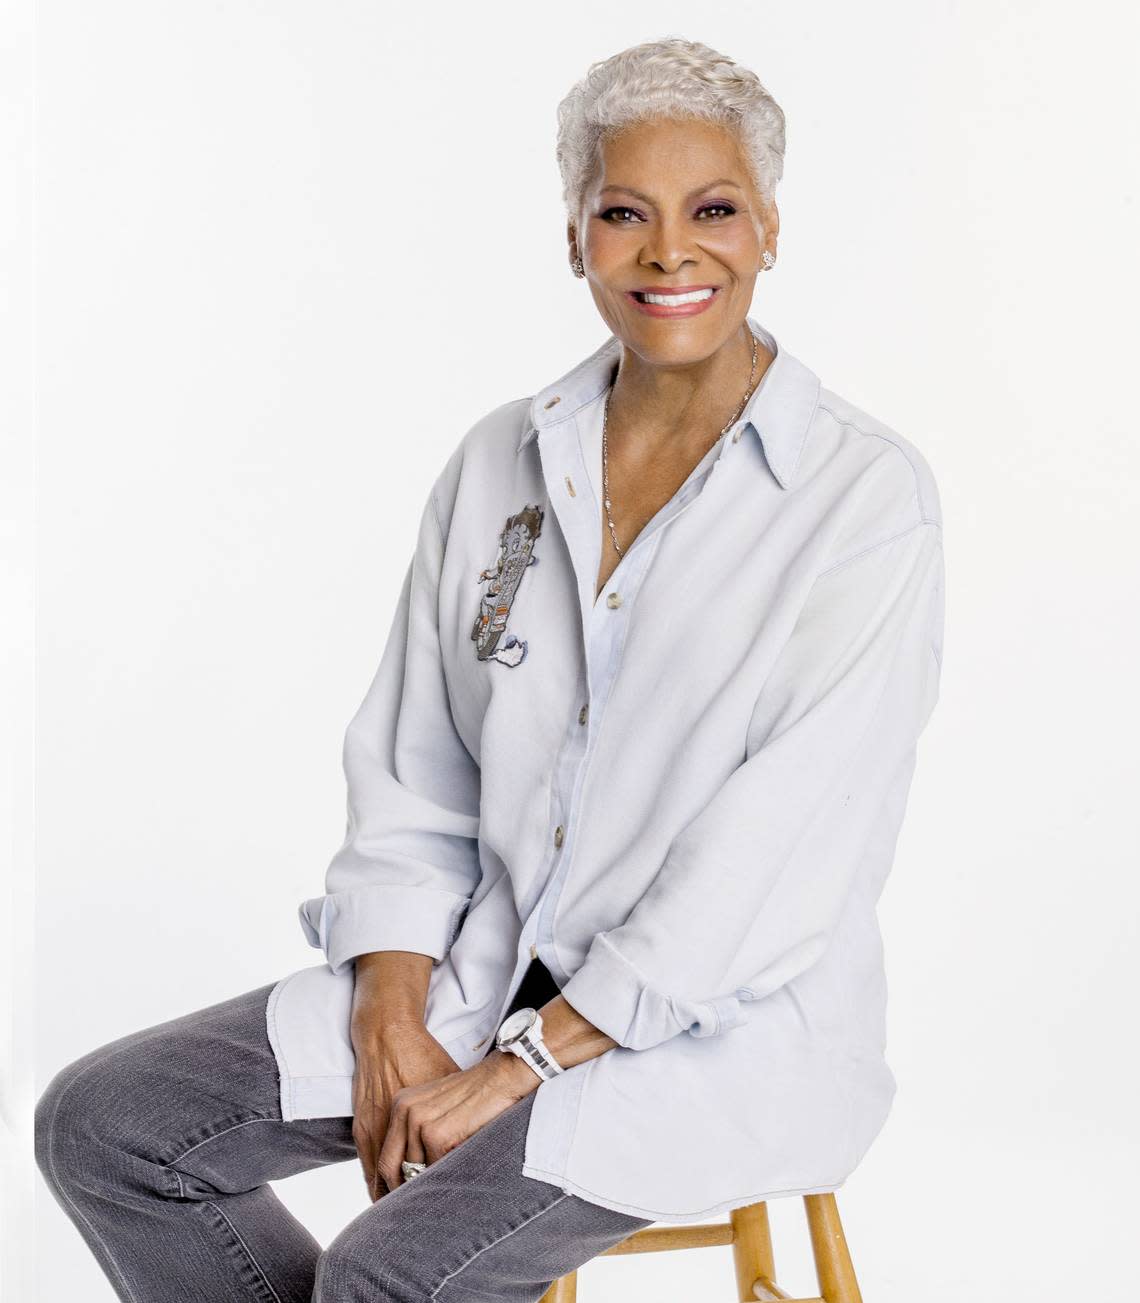 Dionne Warwick served as an executive producer of “HITS! The Musical” with her son Damon Elliott. The musical played The Parker in Fort Lauderdale on April 1, 2023.